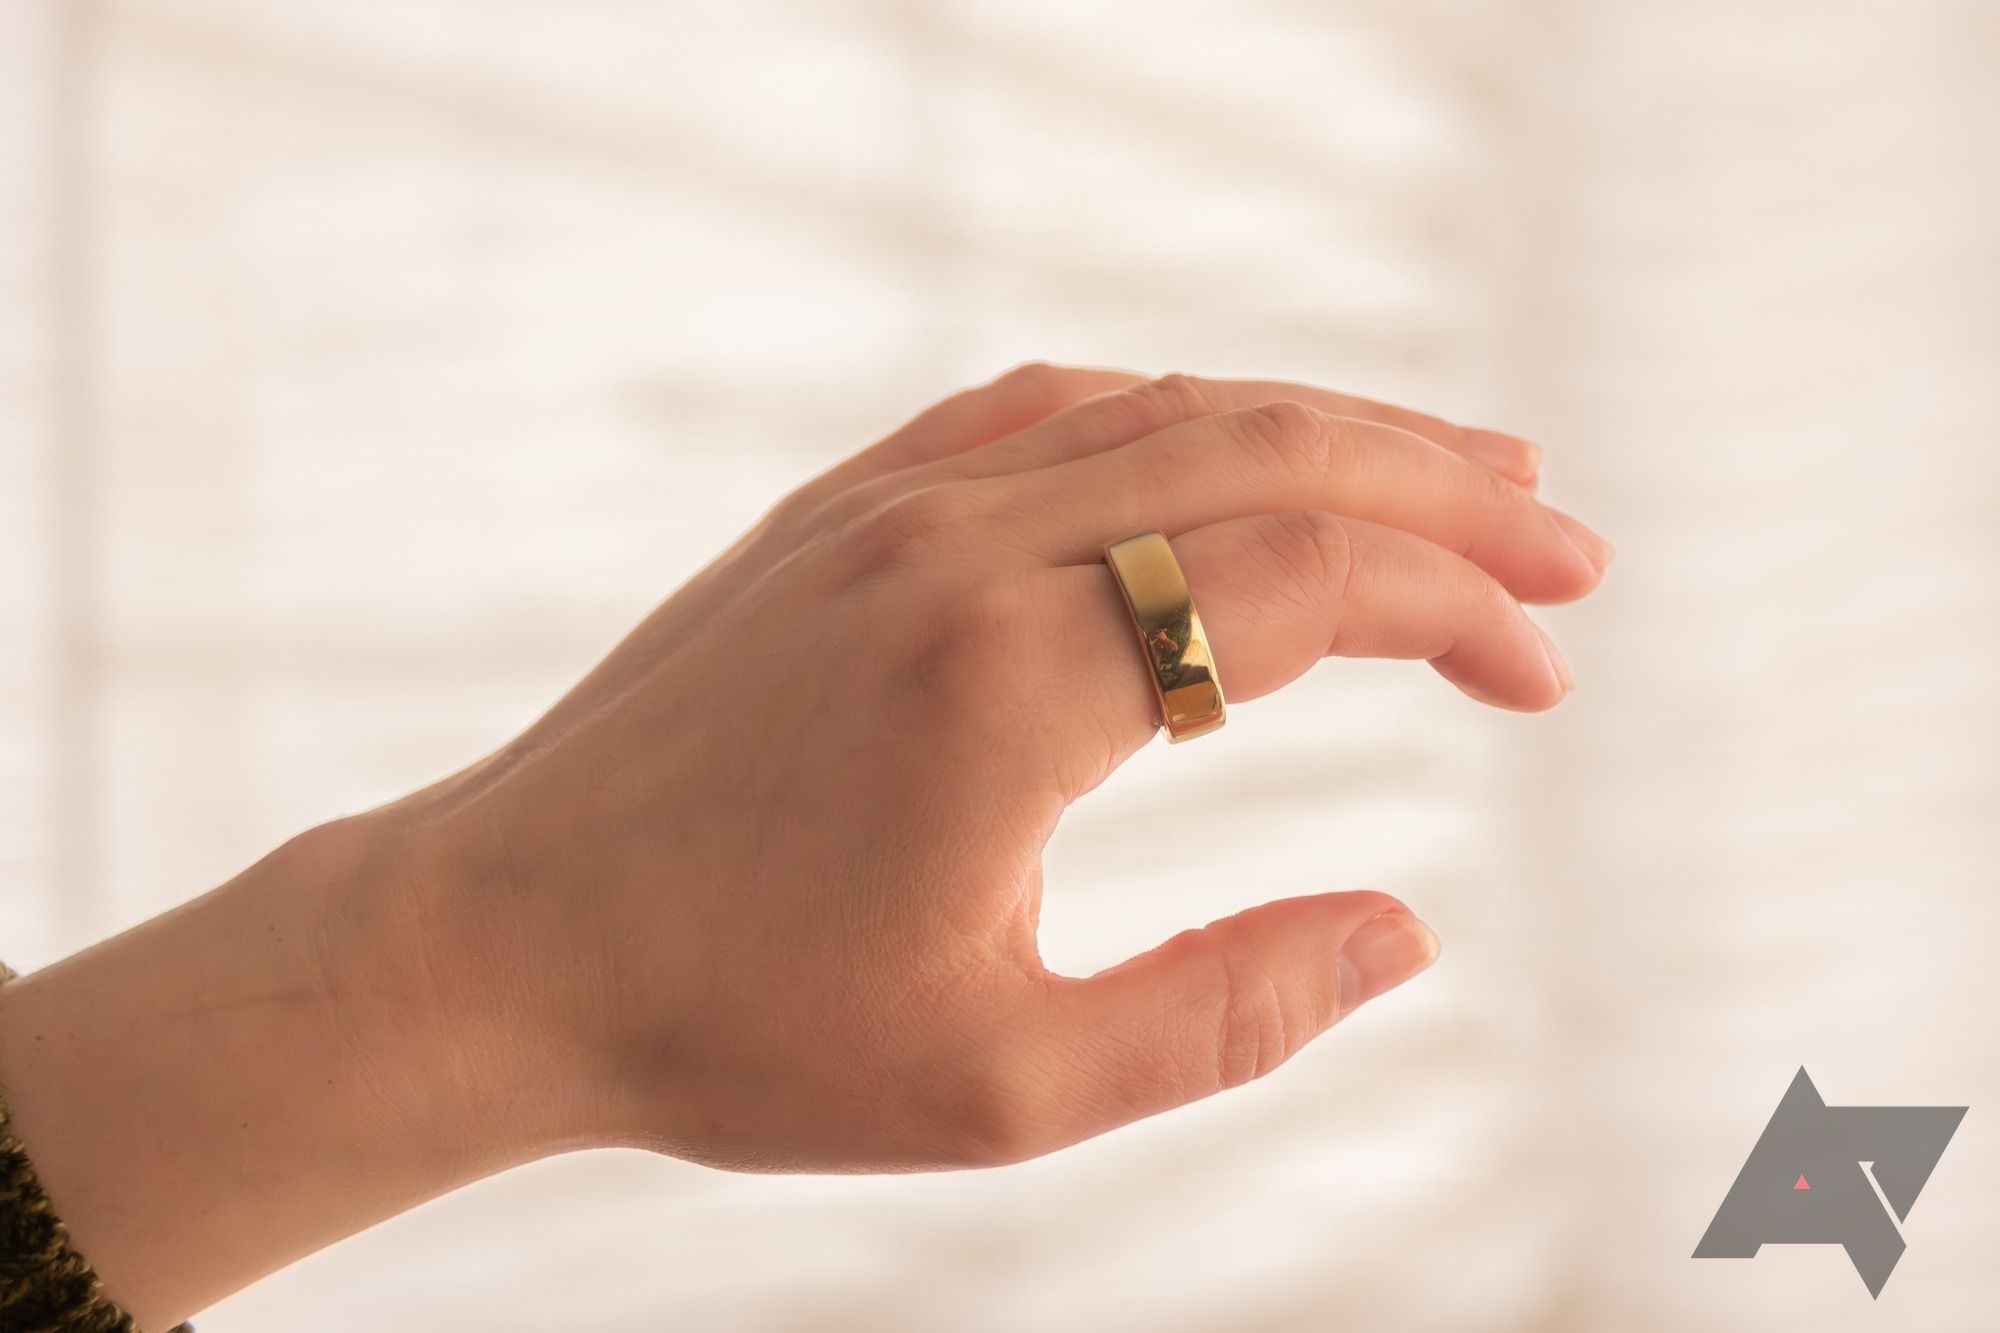 A golden Oura Ring Gen 3 being worn on the index finger over an off-white background